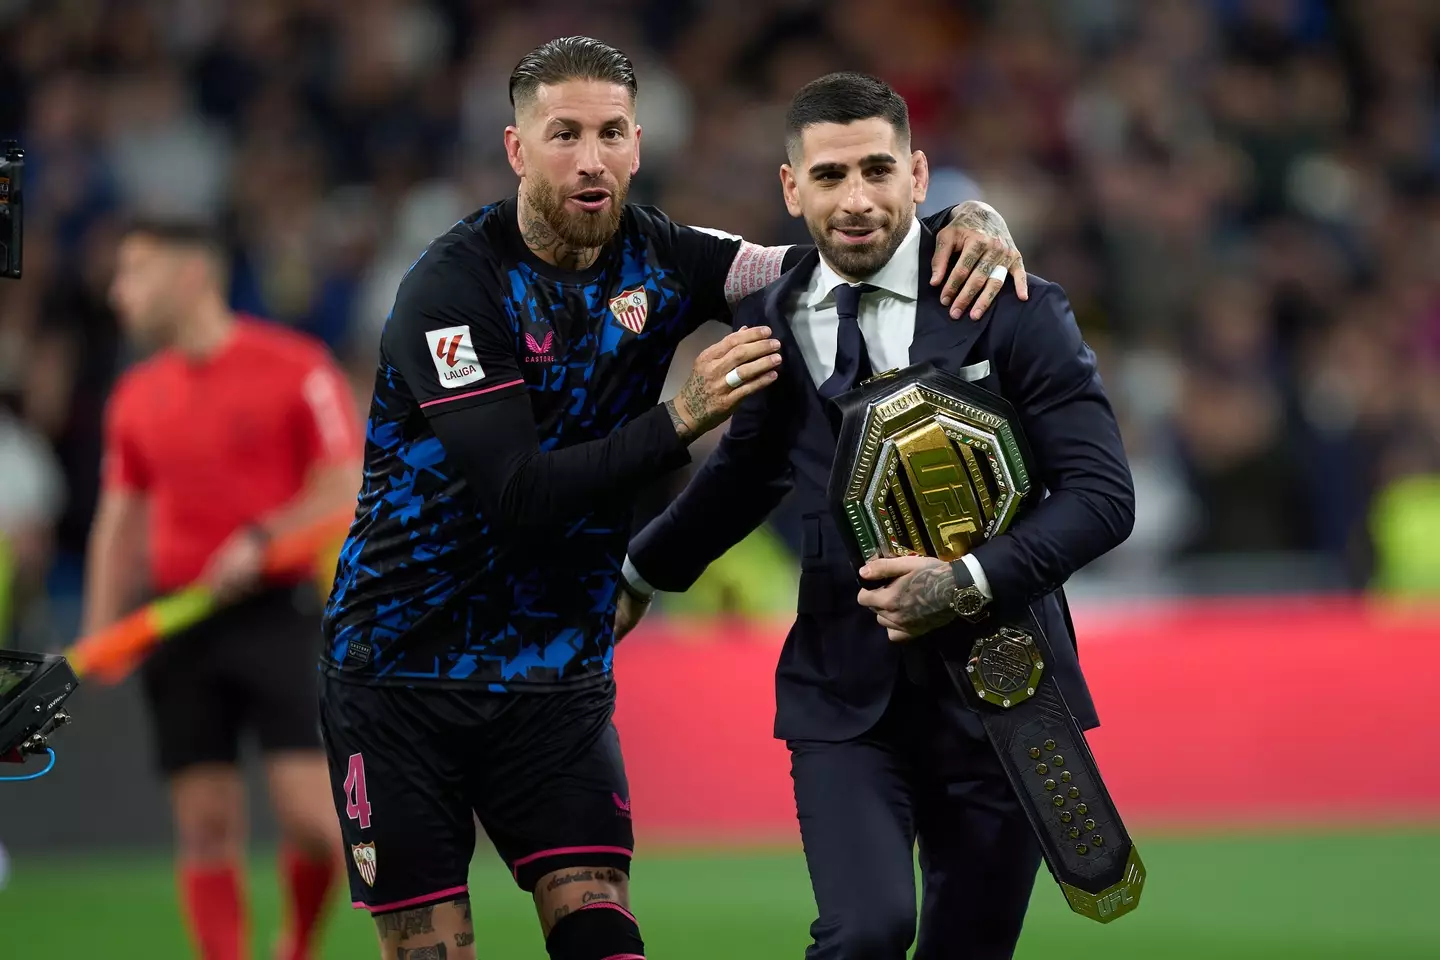 Ilia Topuria with Sergio Ramos as he parades his UFC title at the Bernabeu. Image: Getty